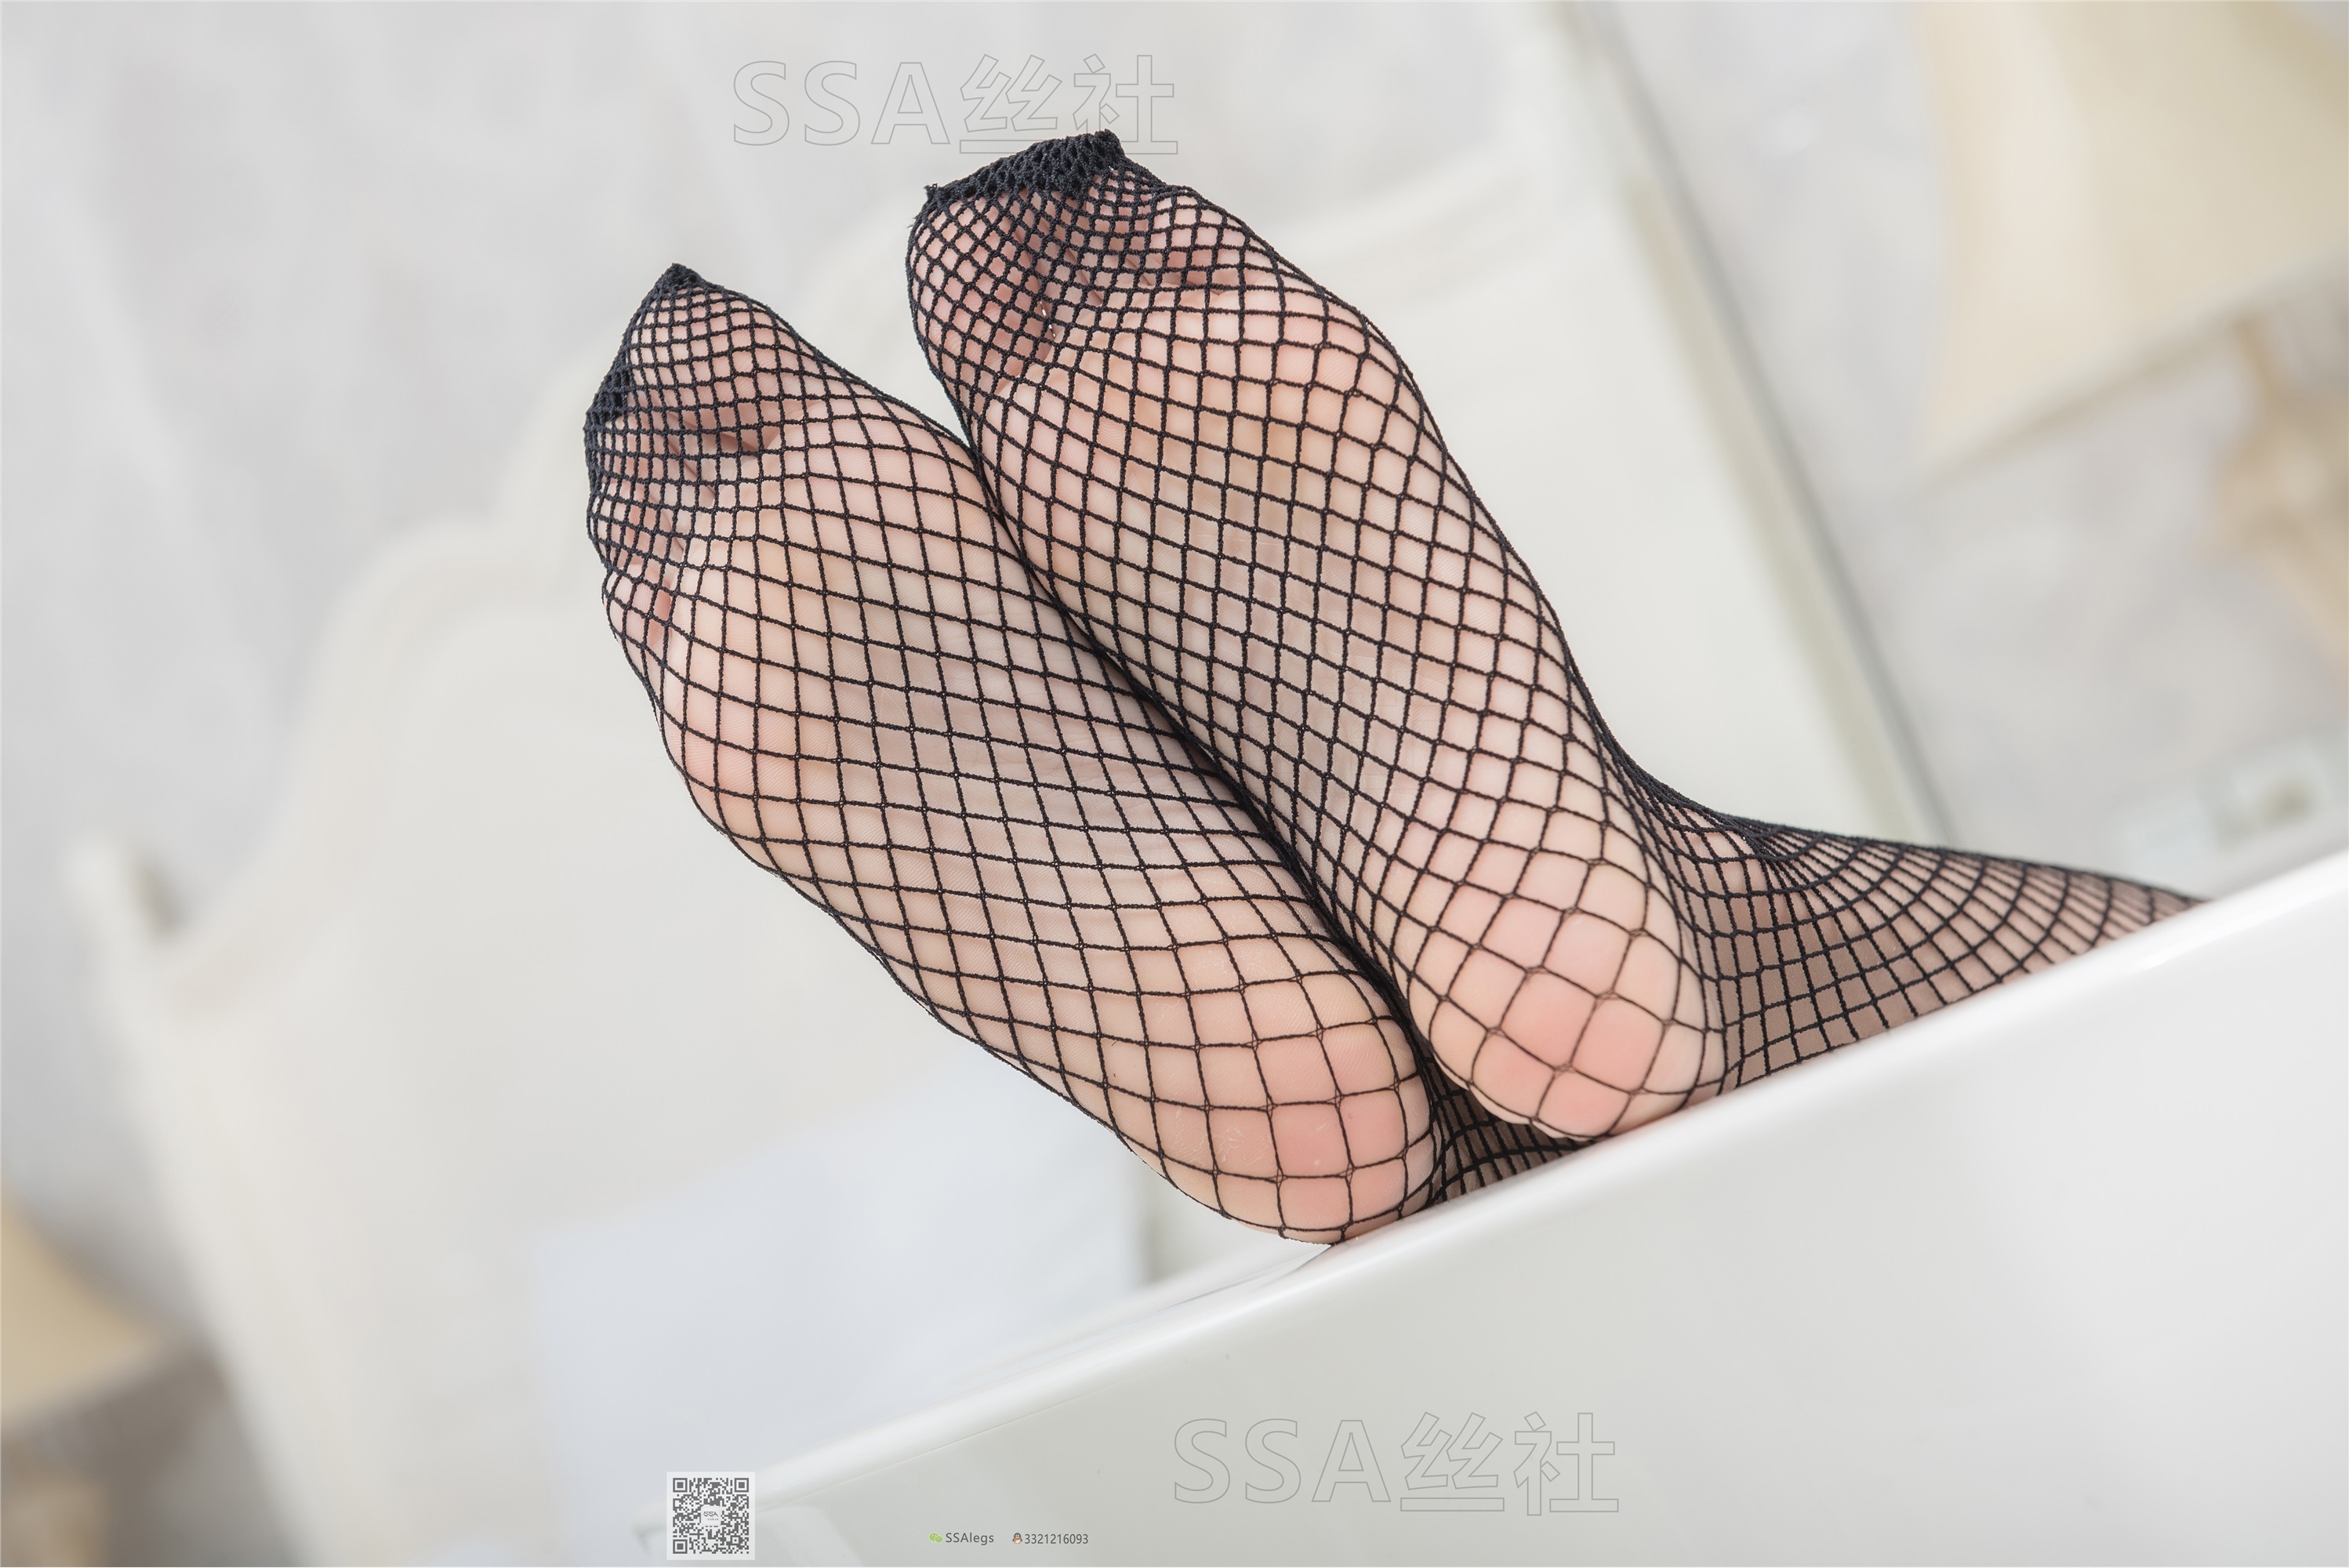 SSA Silk Society super clear photo NO.066 Xixi playthings mourning net socks